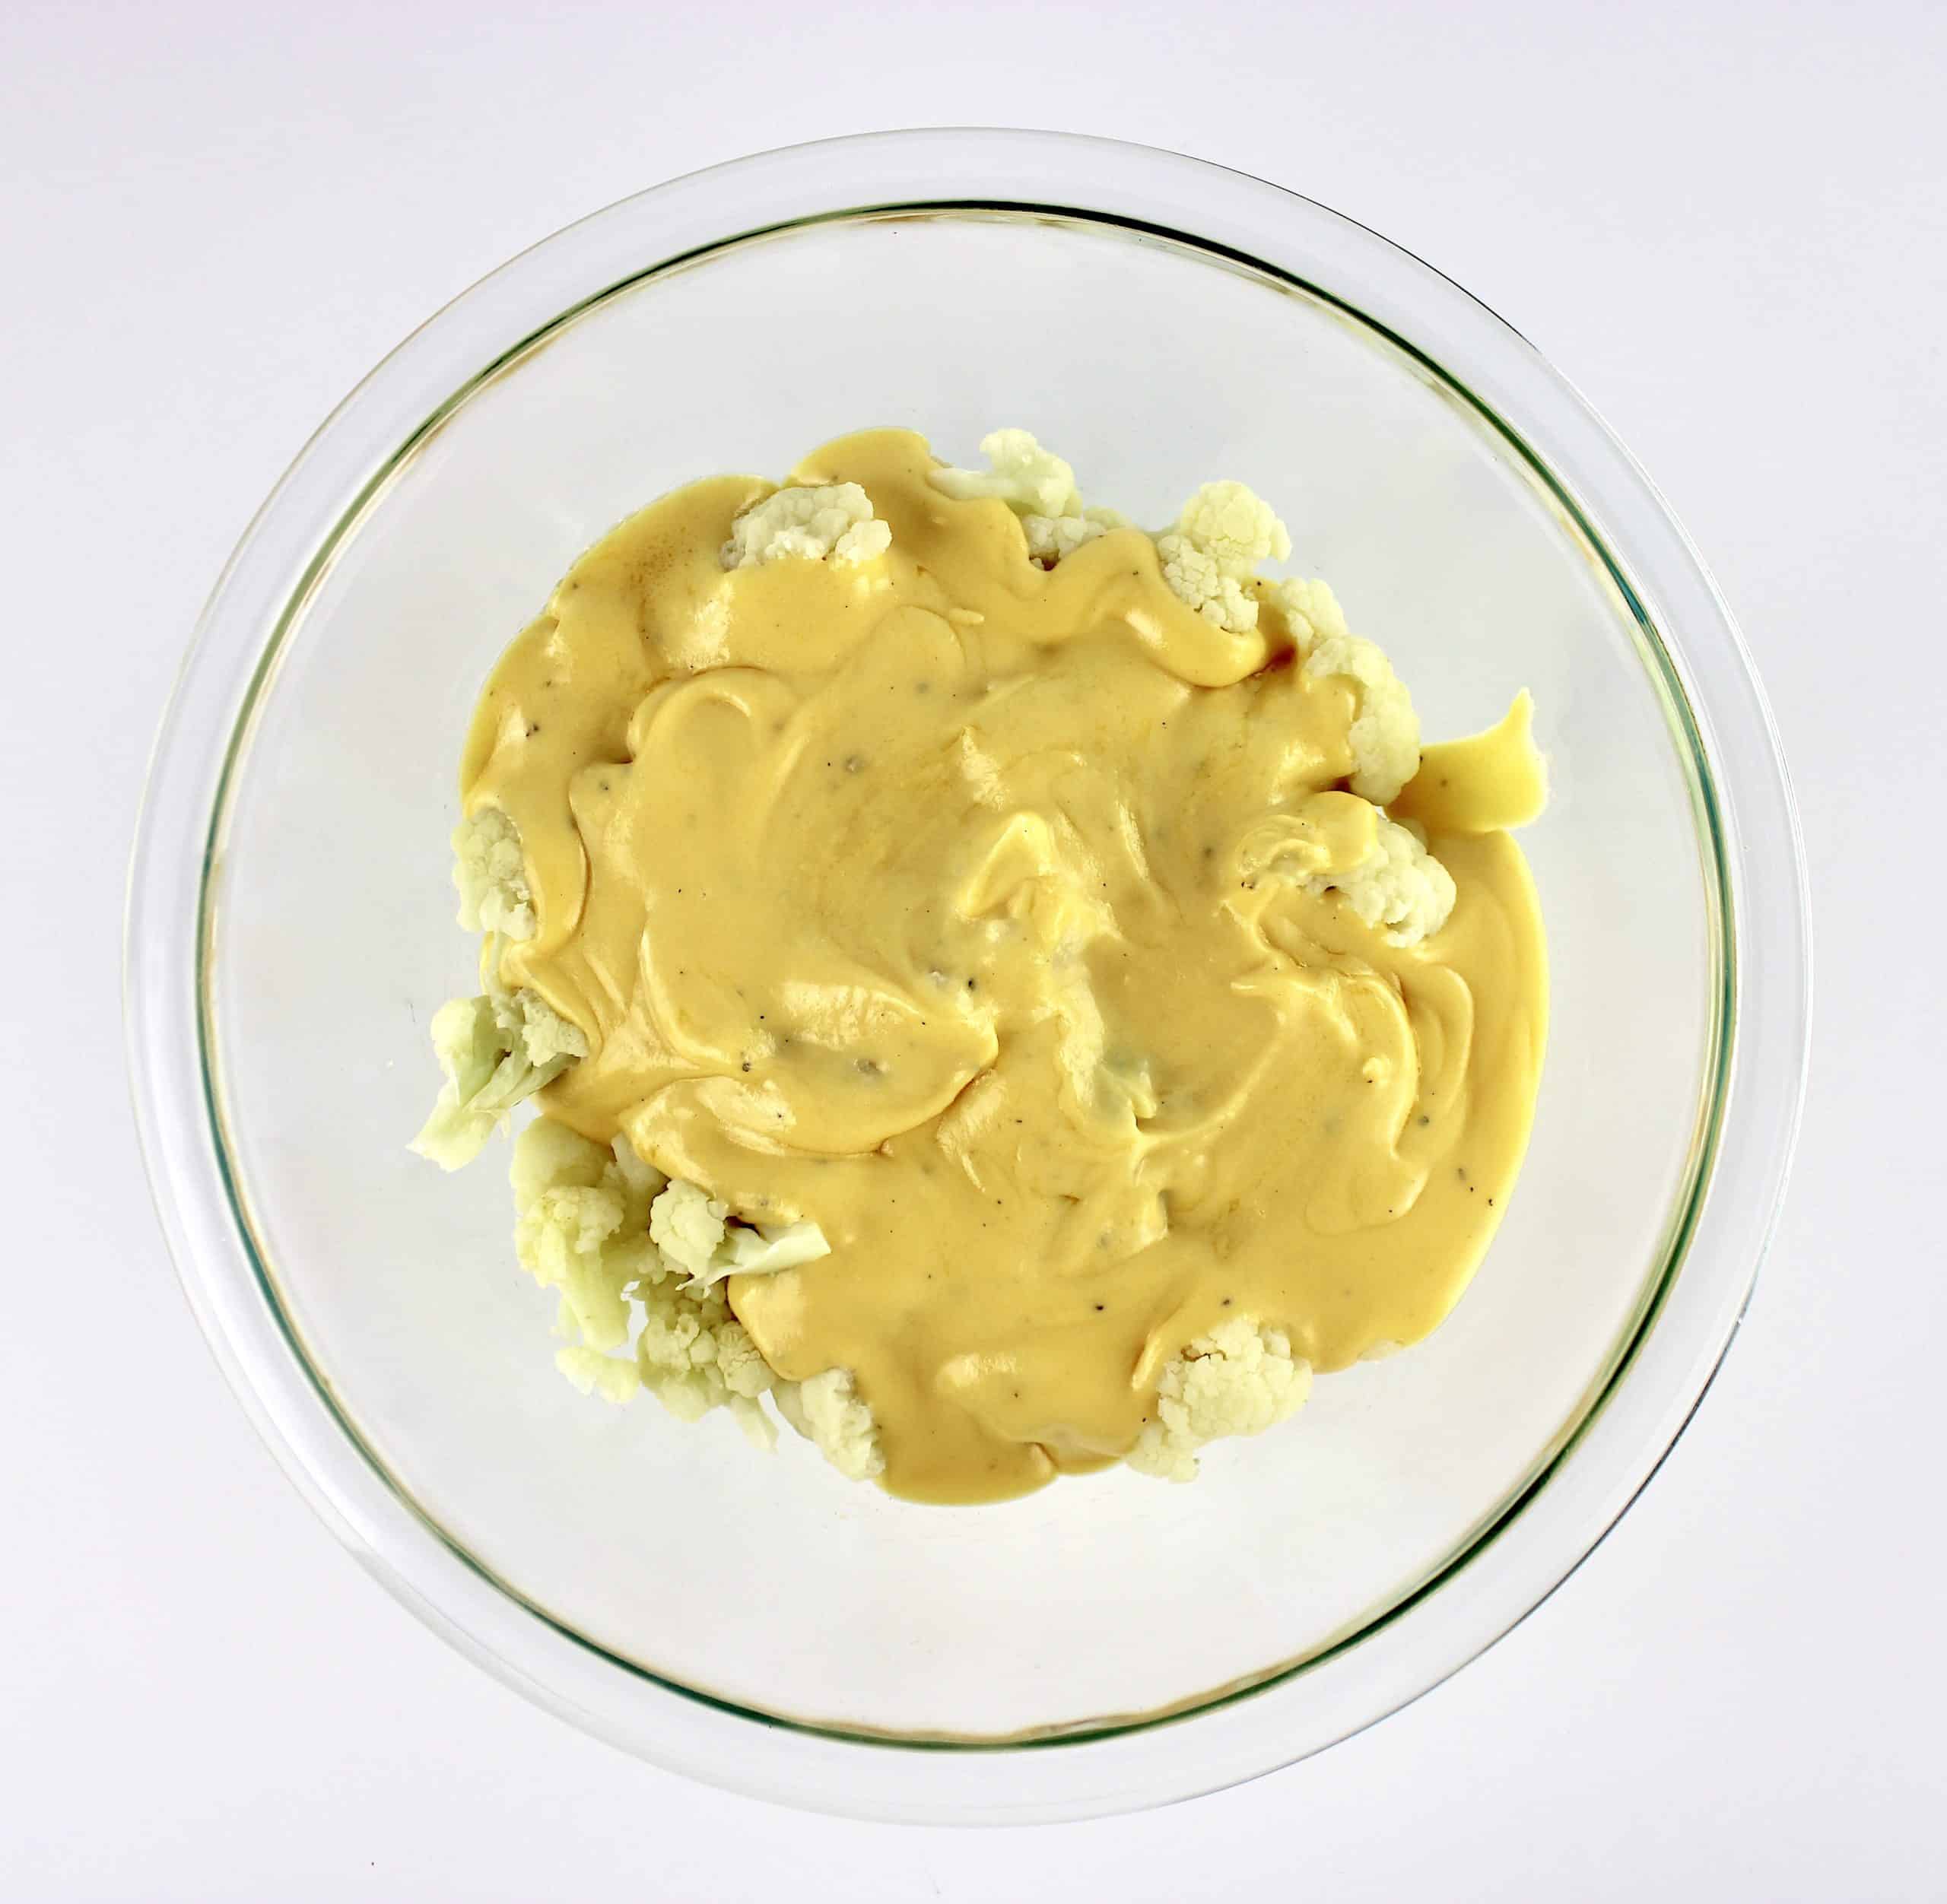 cheese sauce over the top of cauliflower florets in glass bowl